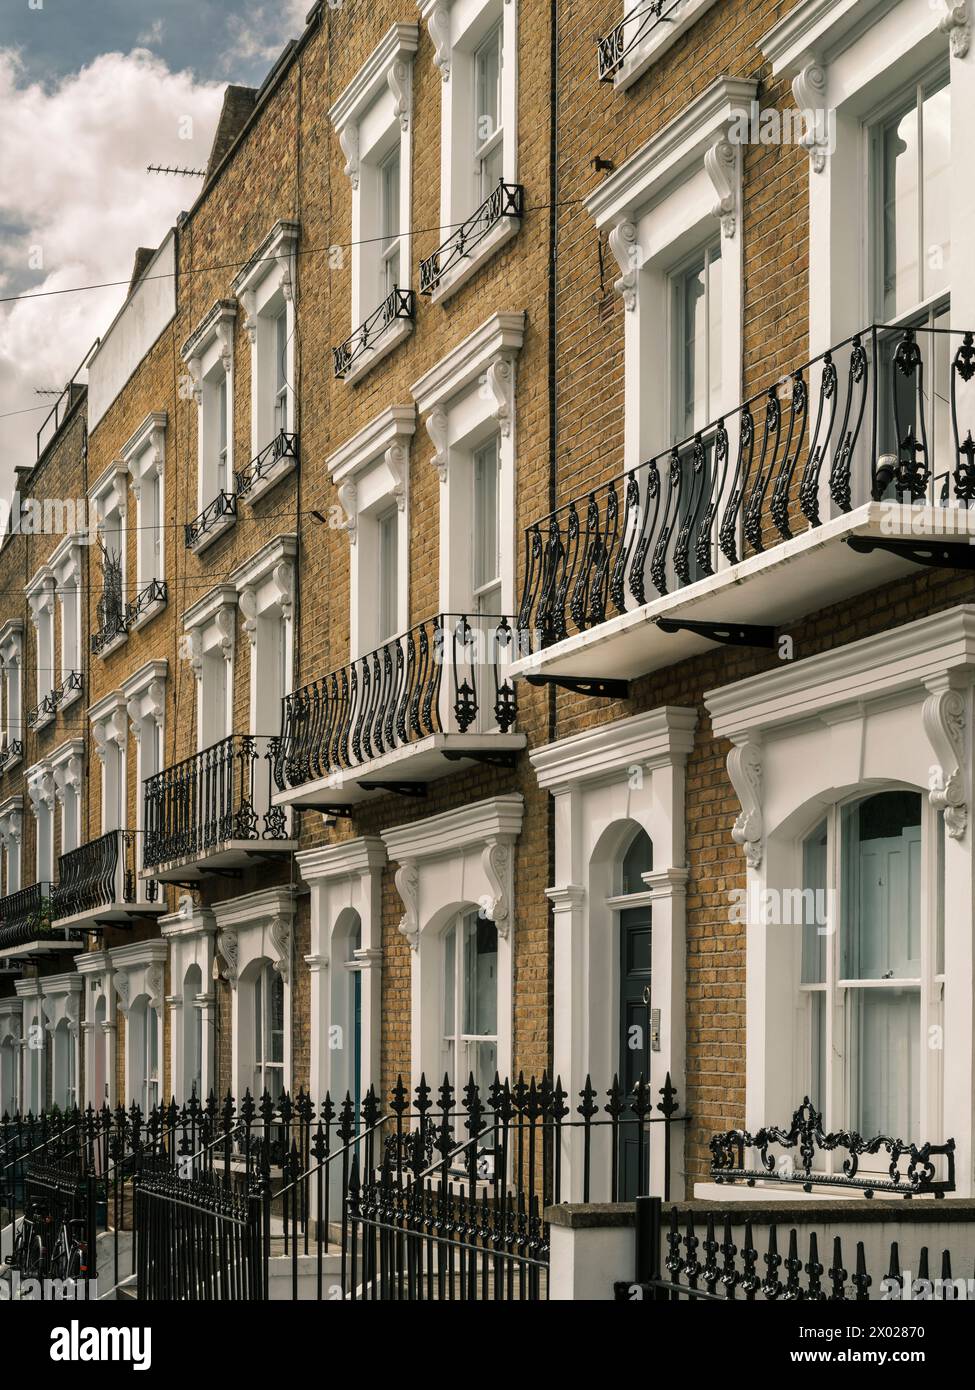 The balconies and railings of the terraced houses that line Huntingdon Street in Barnsbury, Islington, London. Stock Photo